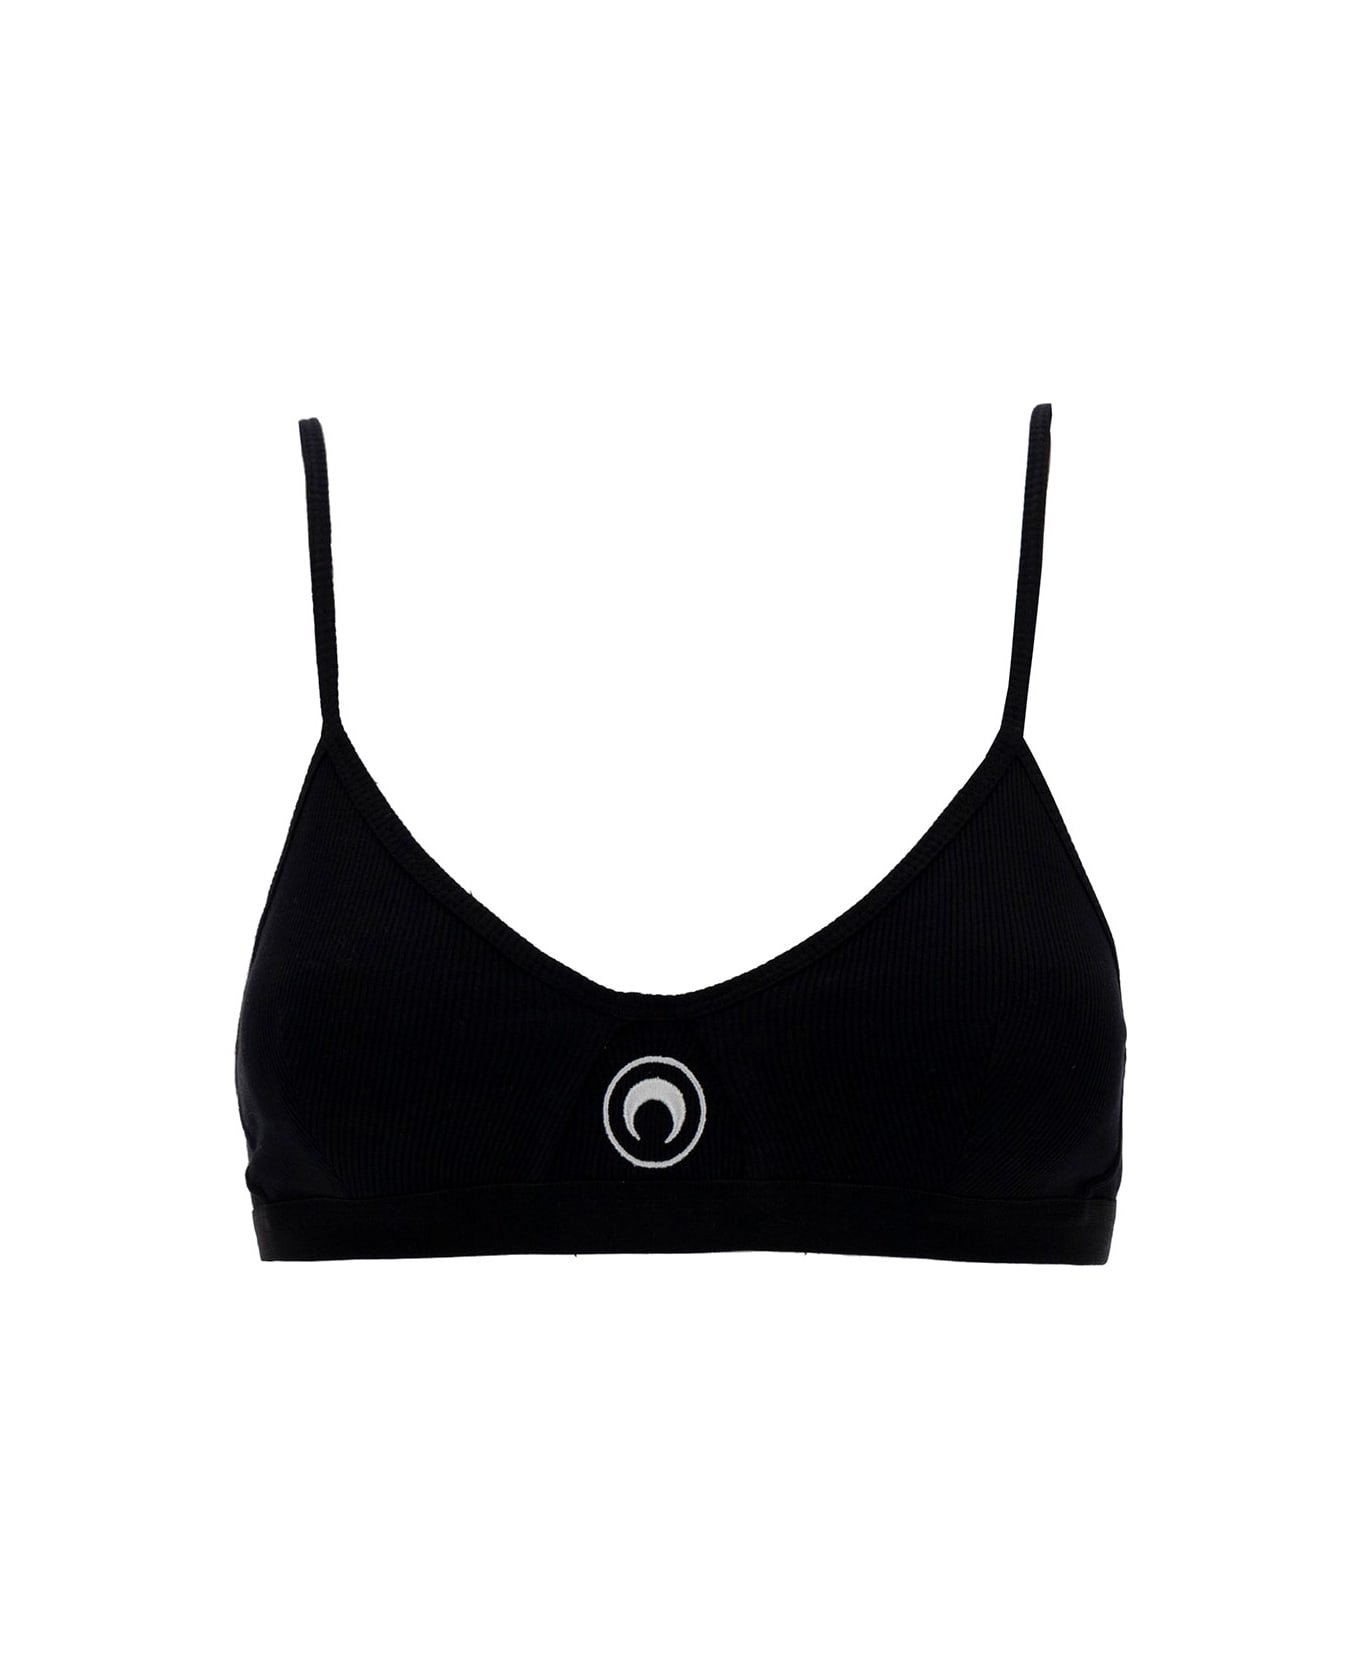 Marine Serre Black Top With Crescent Moon Embroidery In Ribbed Cotton Woman - Black